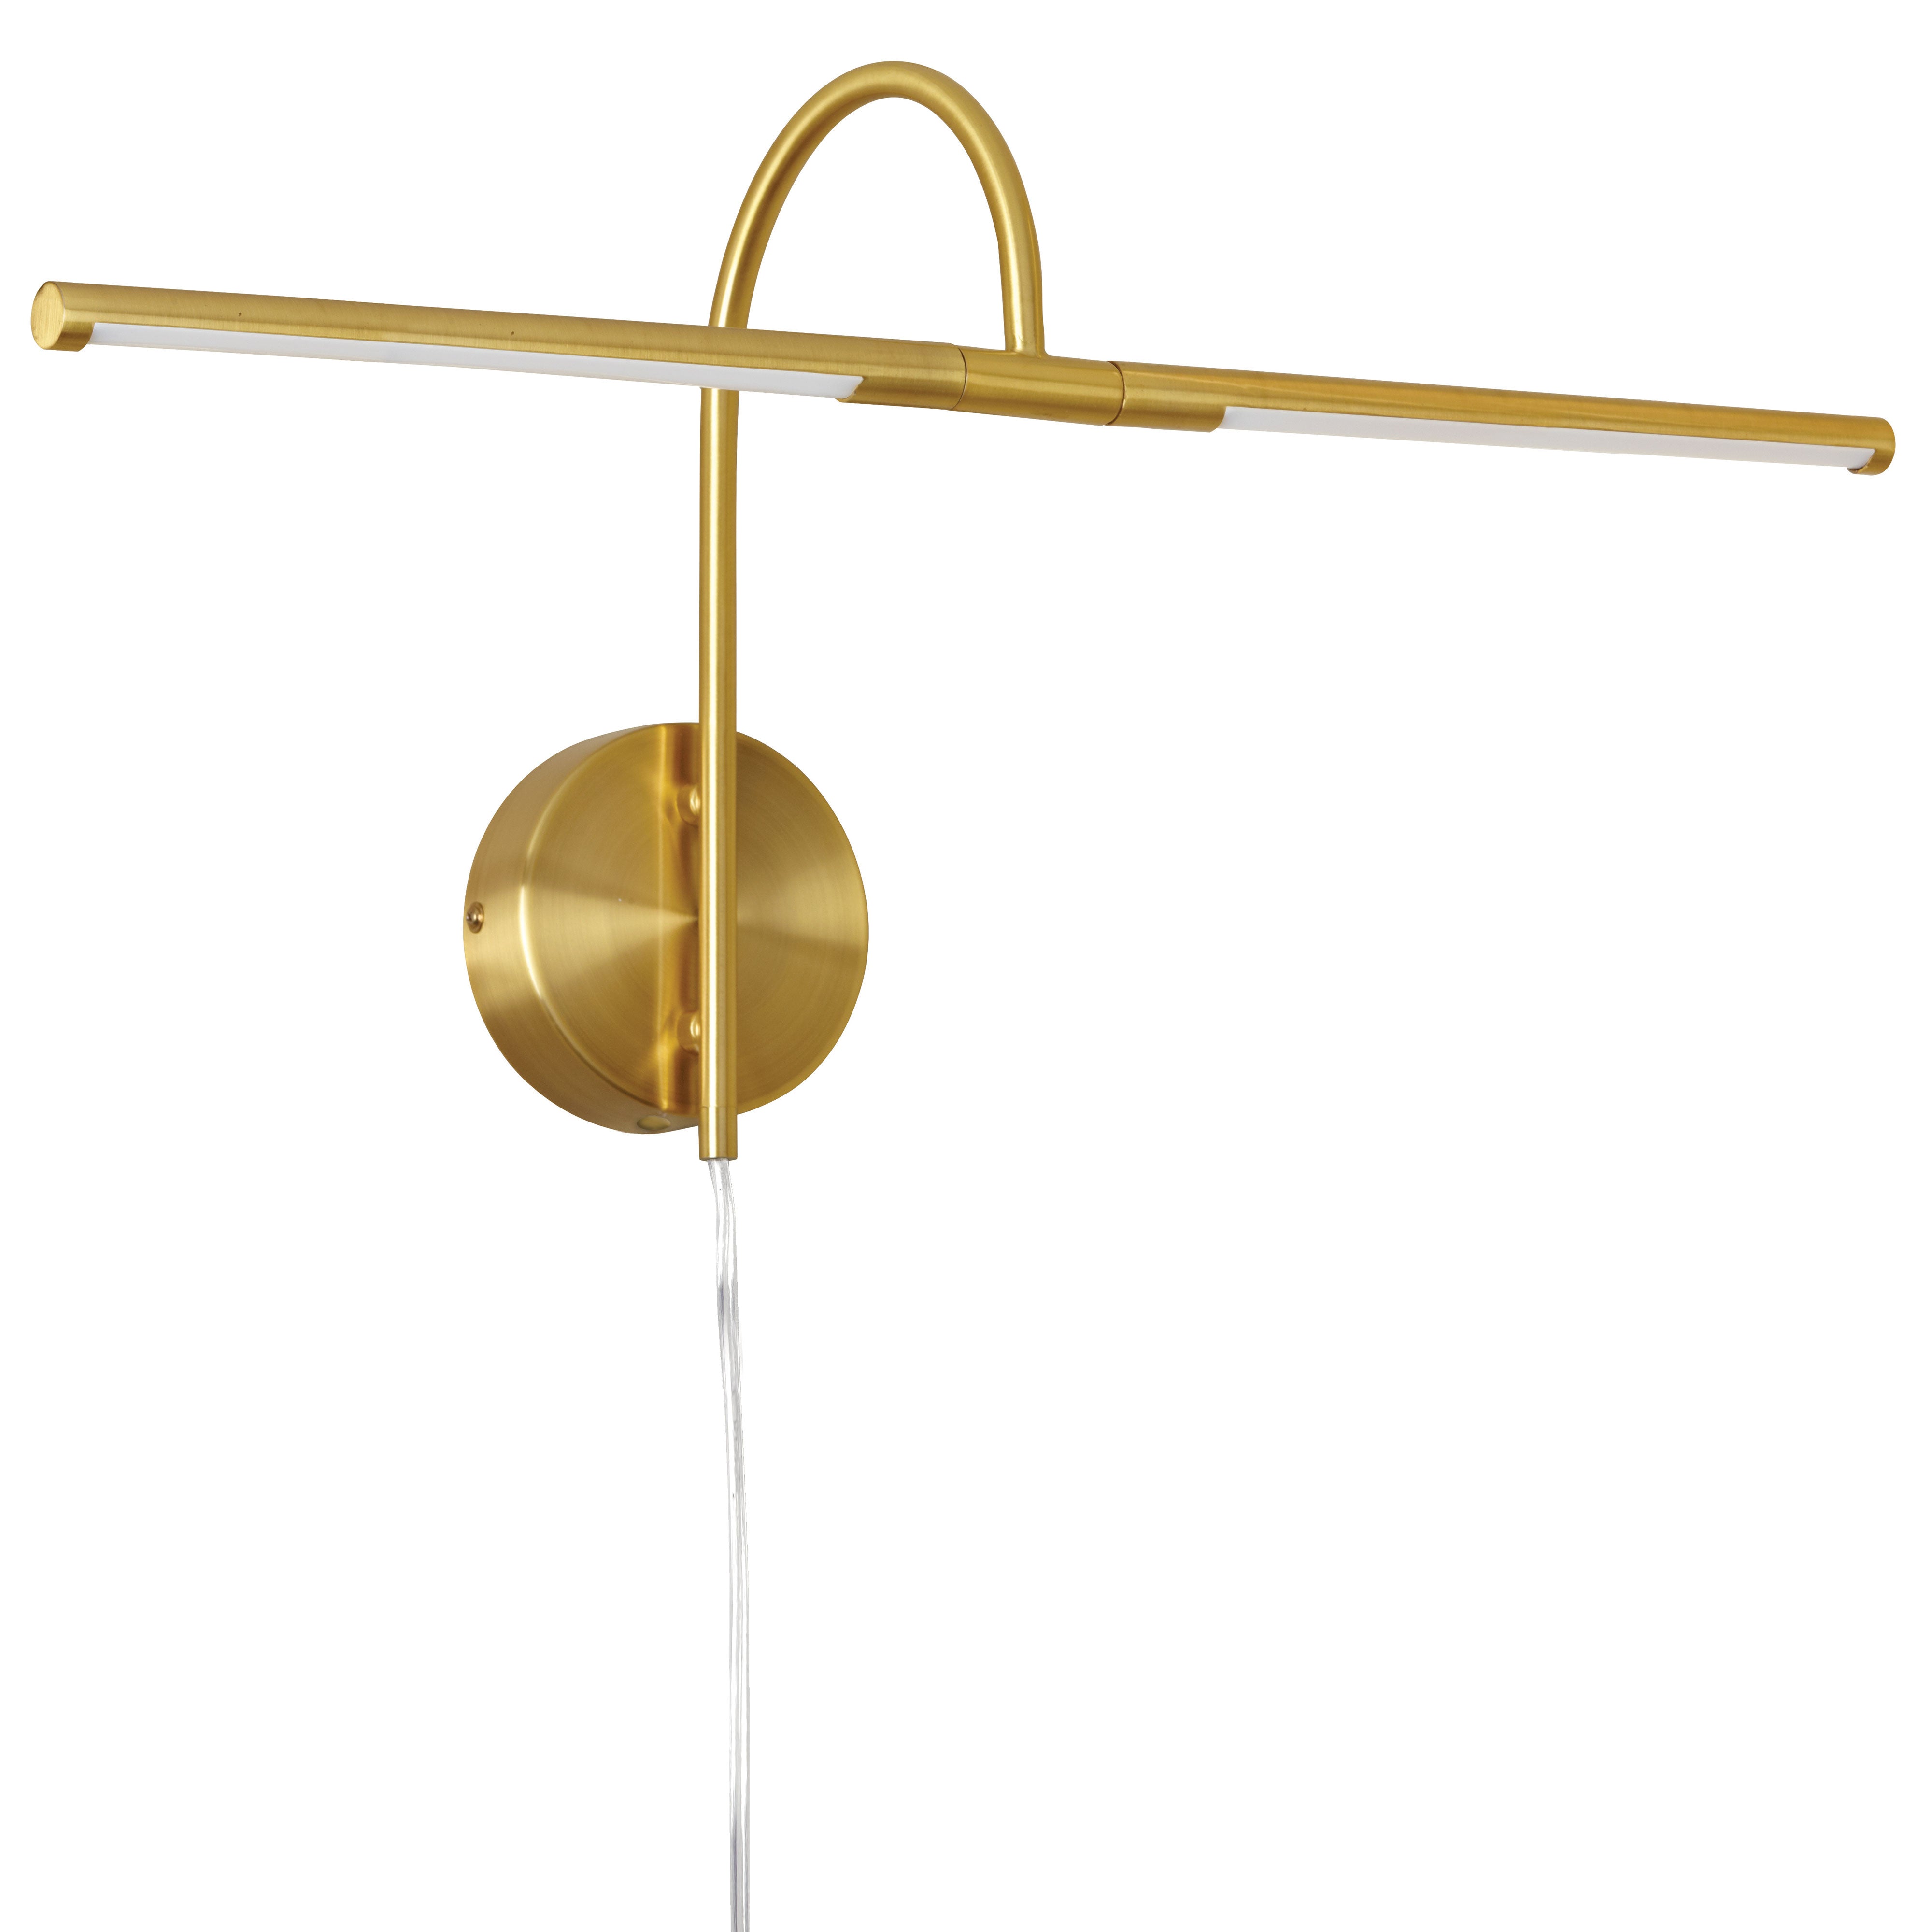 DISPLAY/EXHIBIT Wall sconce à tableau Gold INTEGRATED LED - PICLED-242-AGB | DAINOLITE